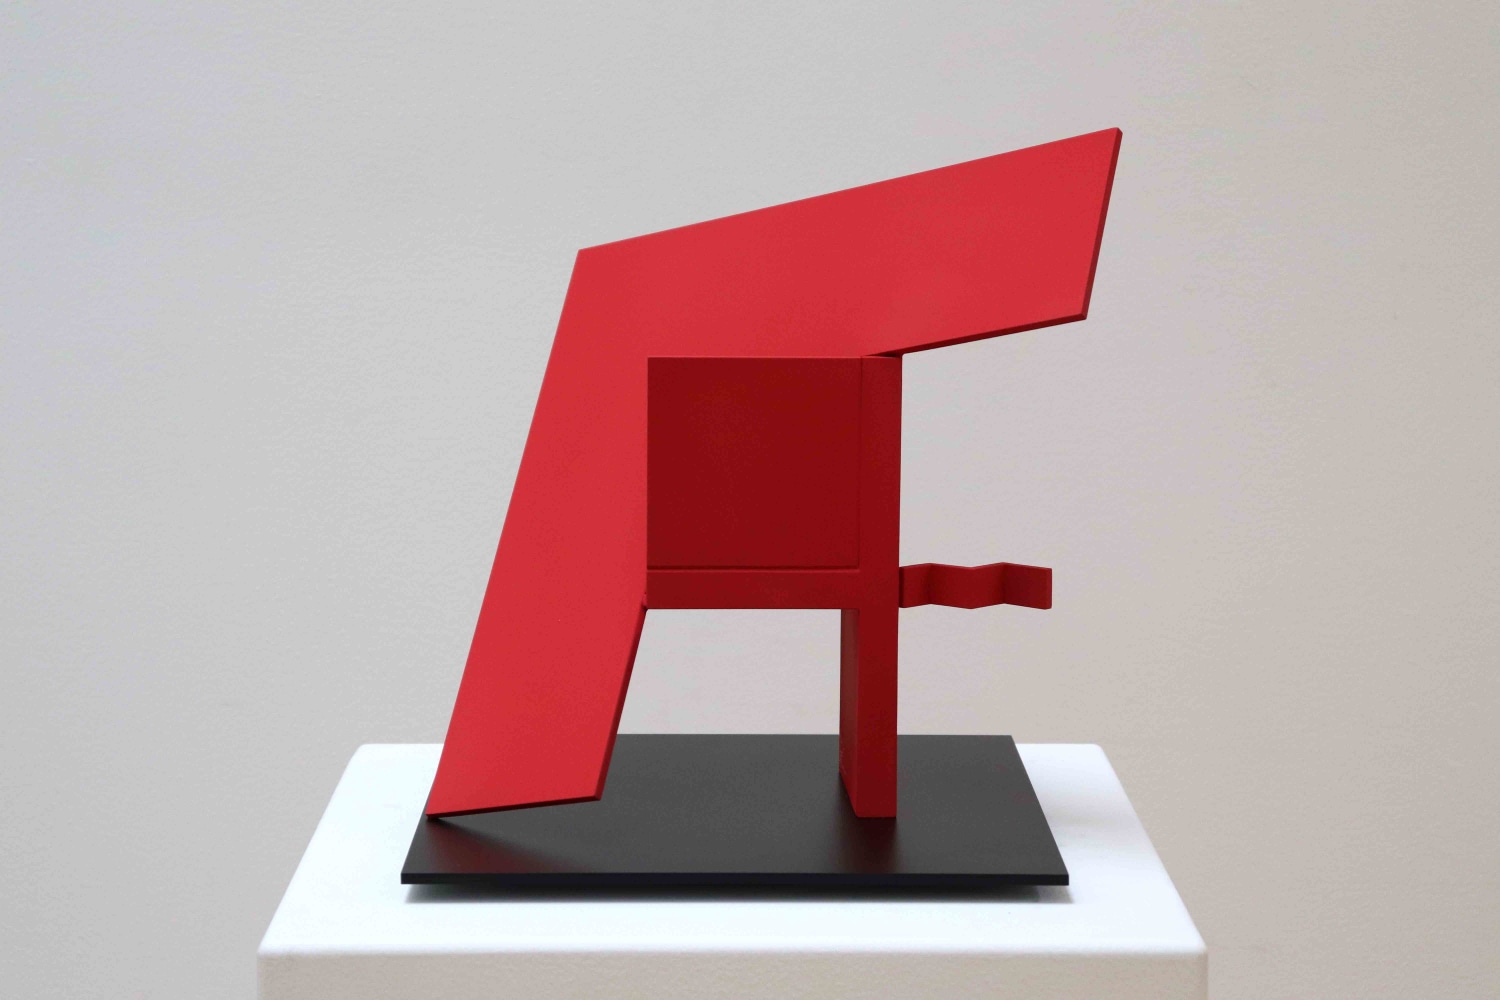 Folded Square Alphabet&amp;nbsp; X, A.P.

2011

Painted Steel

12 x 12 x 12 inches

30.5 x 30.5 x 30.5cm